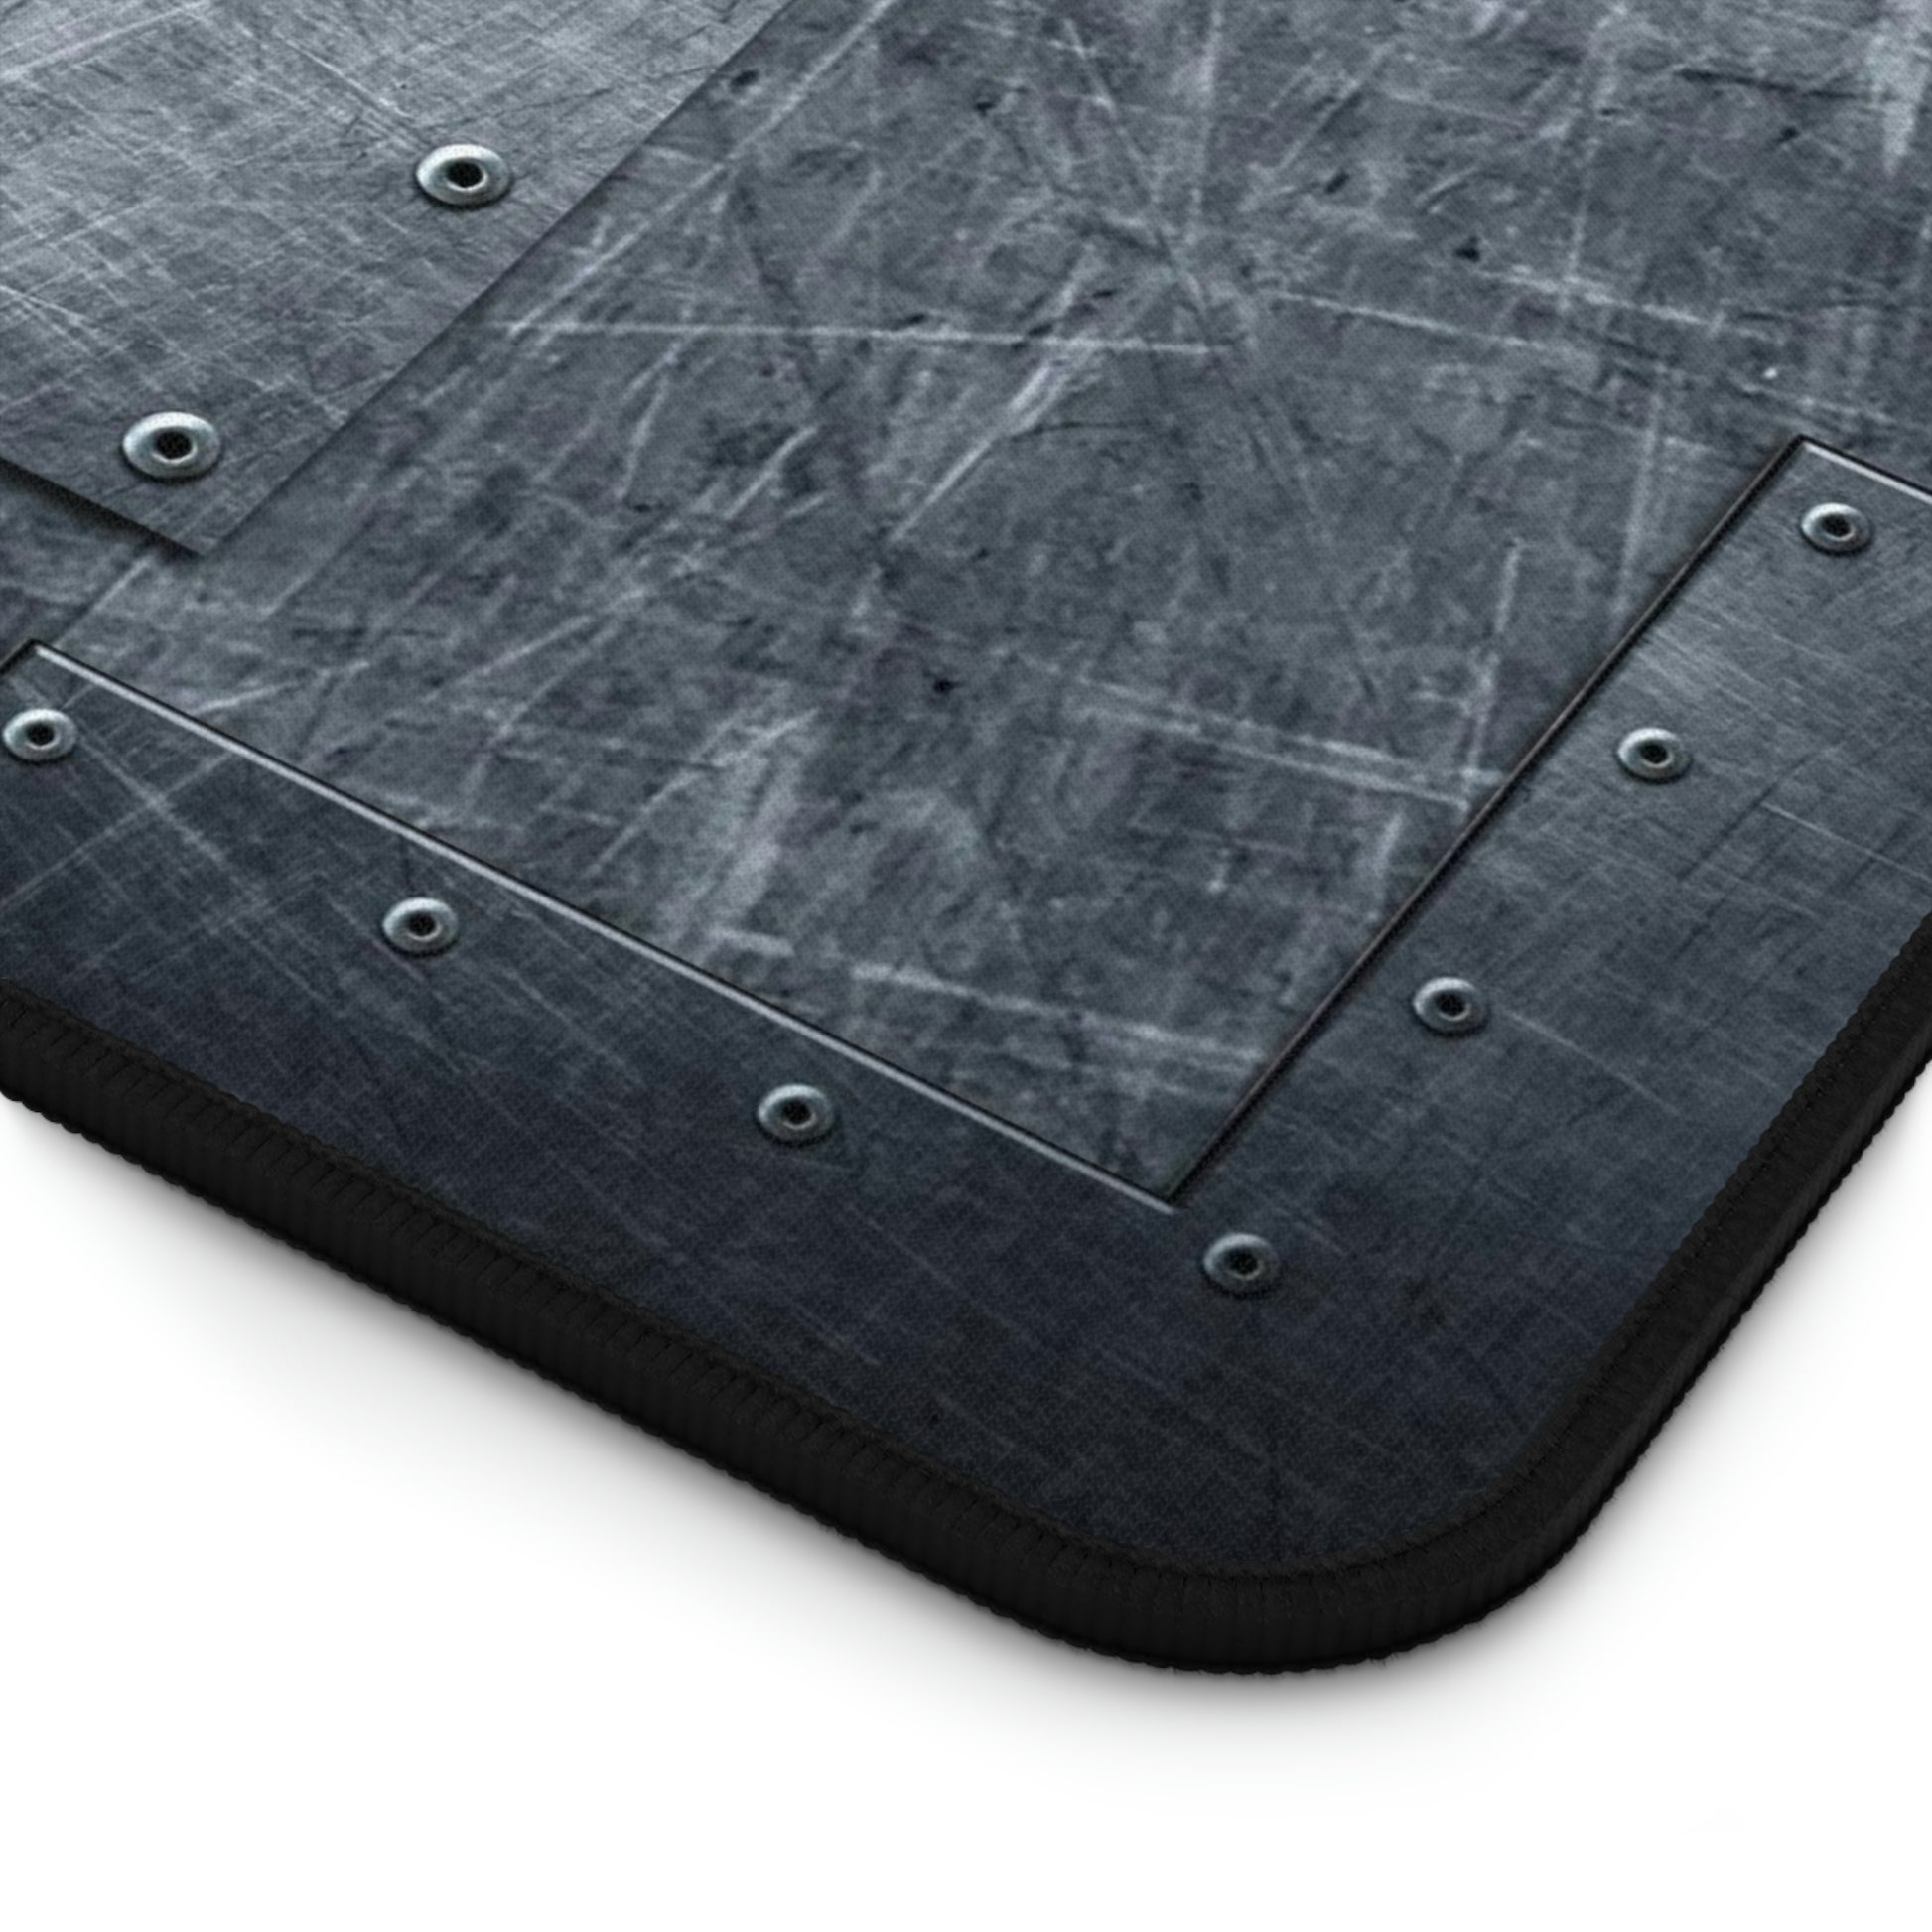 Industrial Themed Desk Accessories - Riveted Steel Sheets Print on Neoprene Desk Mat close up